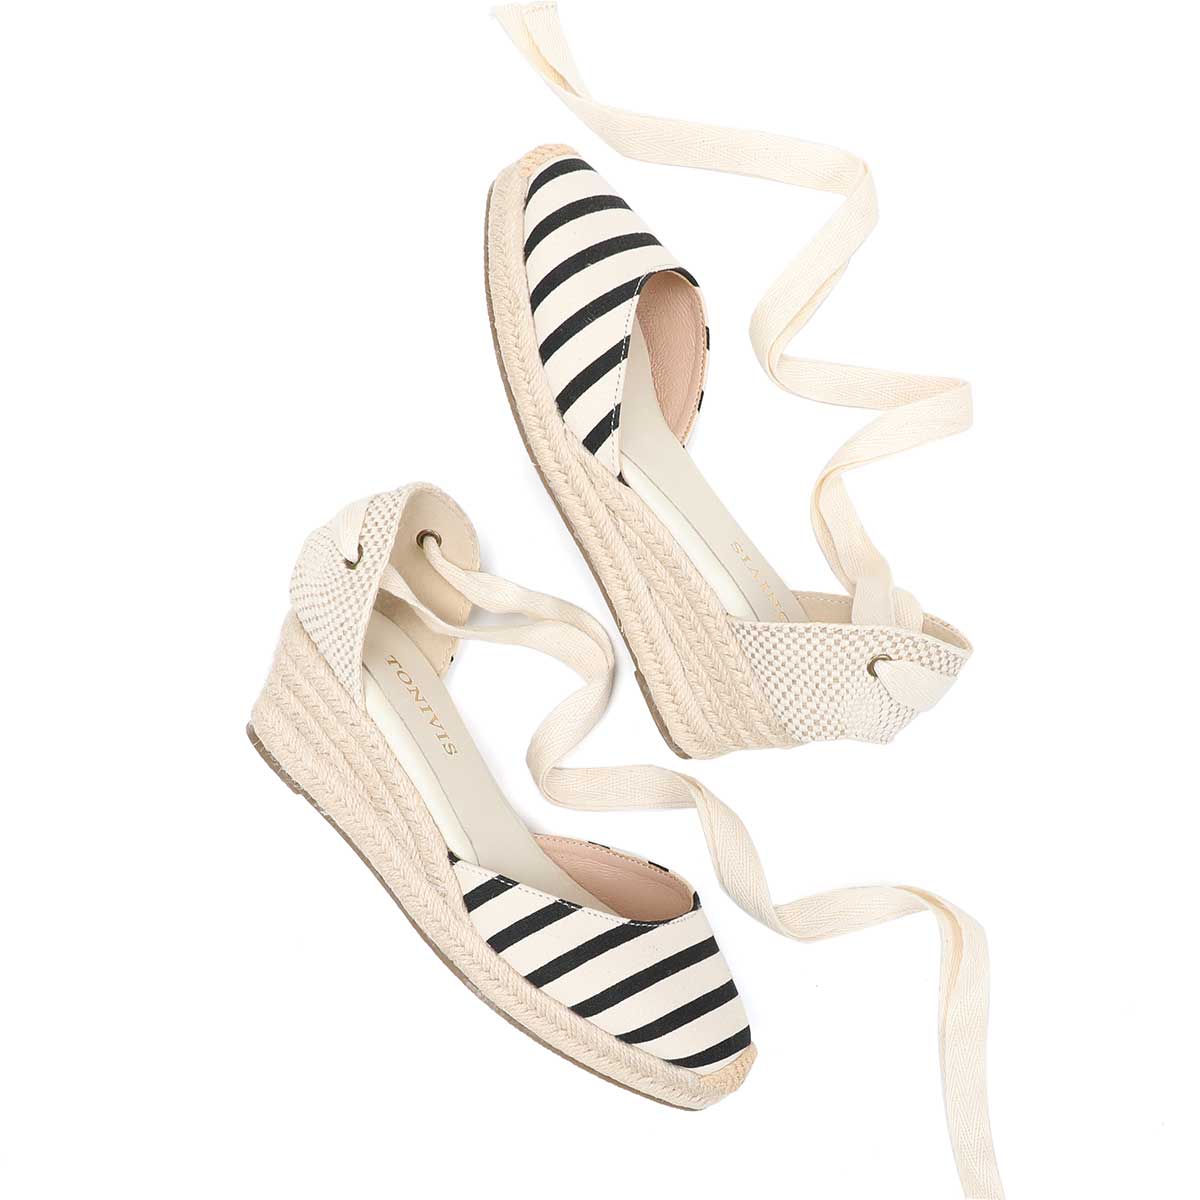 2022 Women's Wedge Low Heel Sandals Promotion Striped Canvas 0-3cm Casual Canvas Covered Sapato Feminino Sandalias Mujer